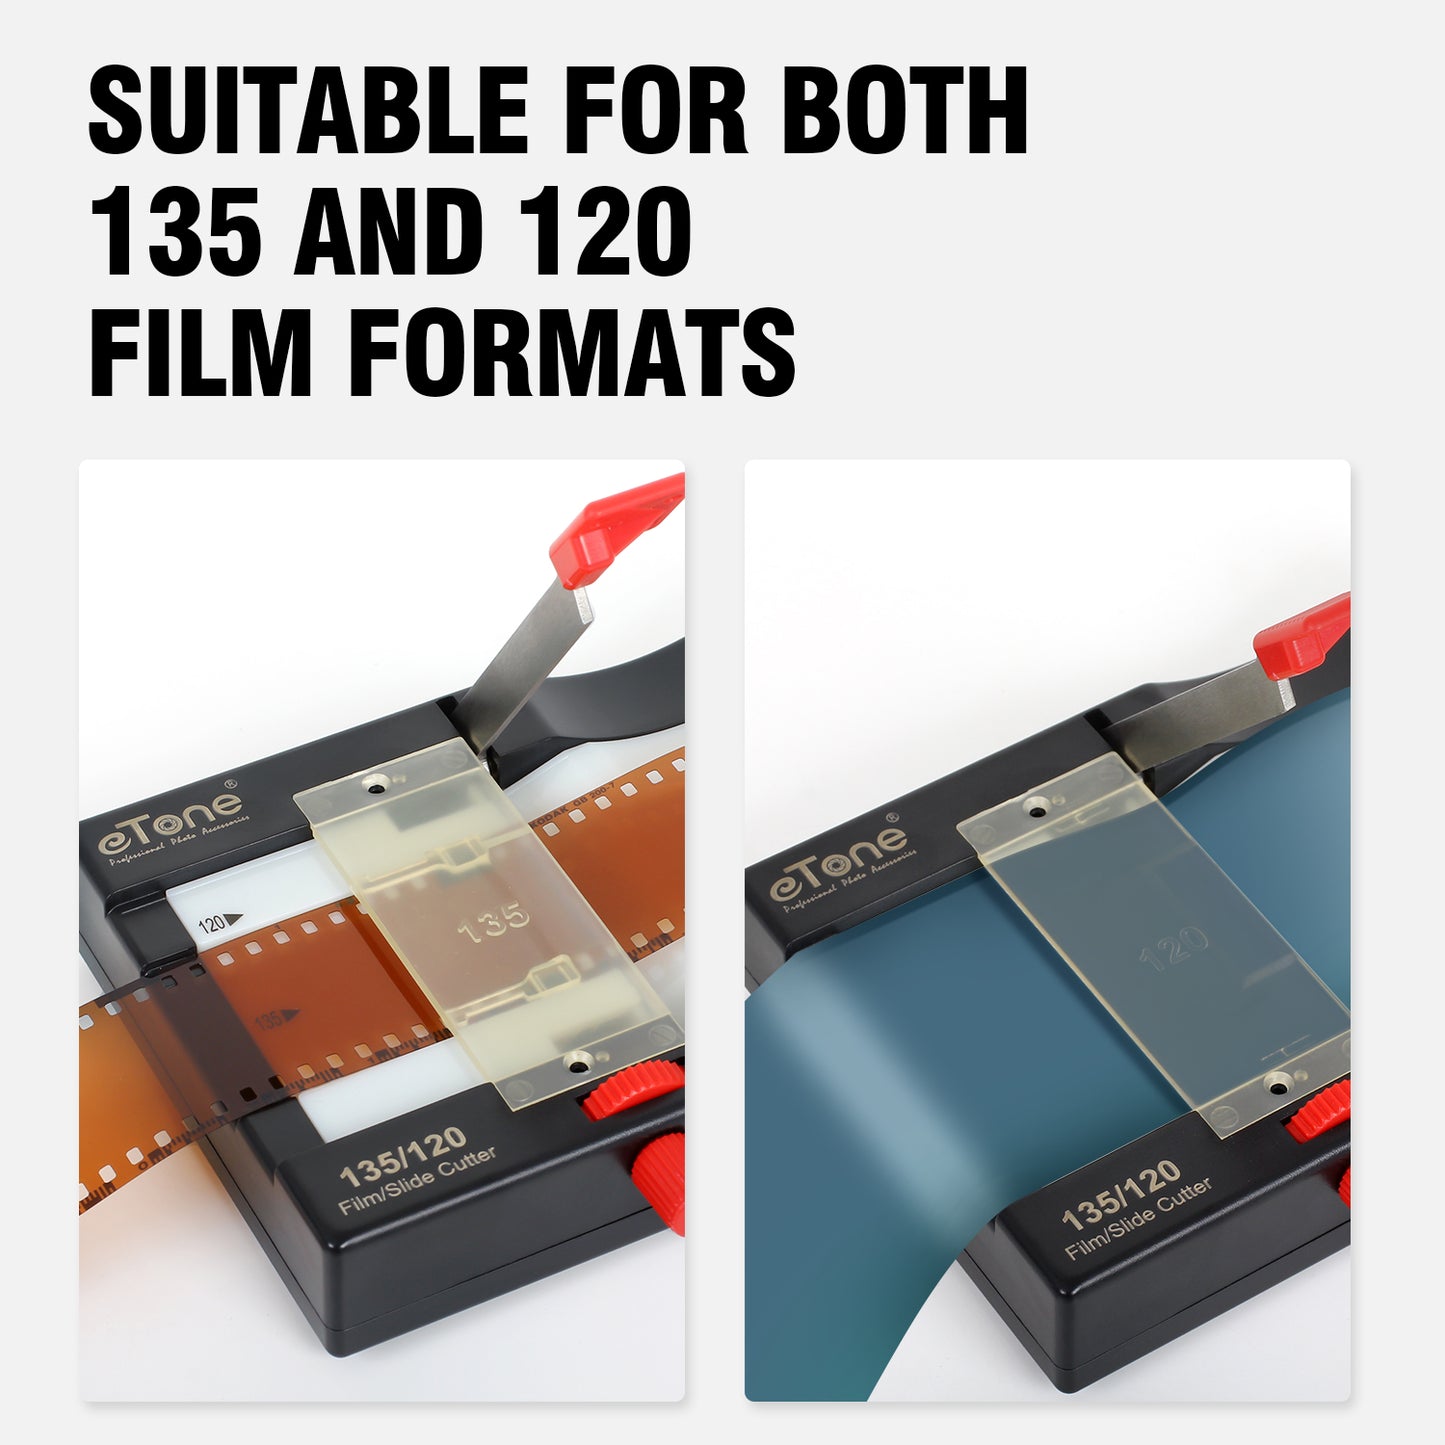 eTone Multiple Slide Negative Film Cutter For 35mm 6x45 6x6 6x7 60mm Format With USB